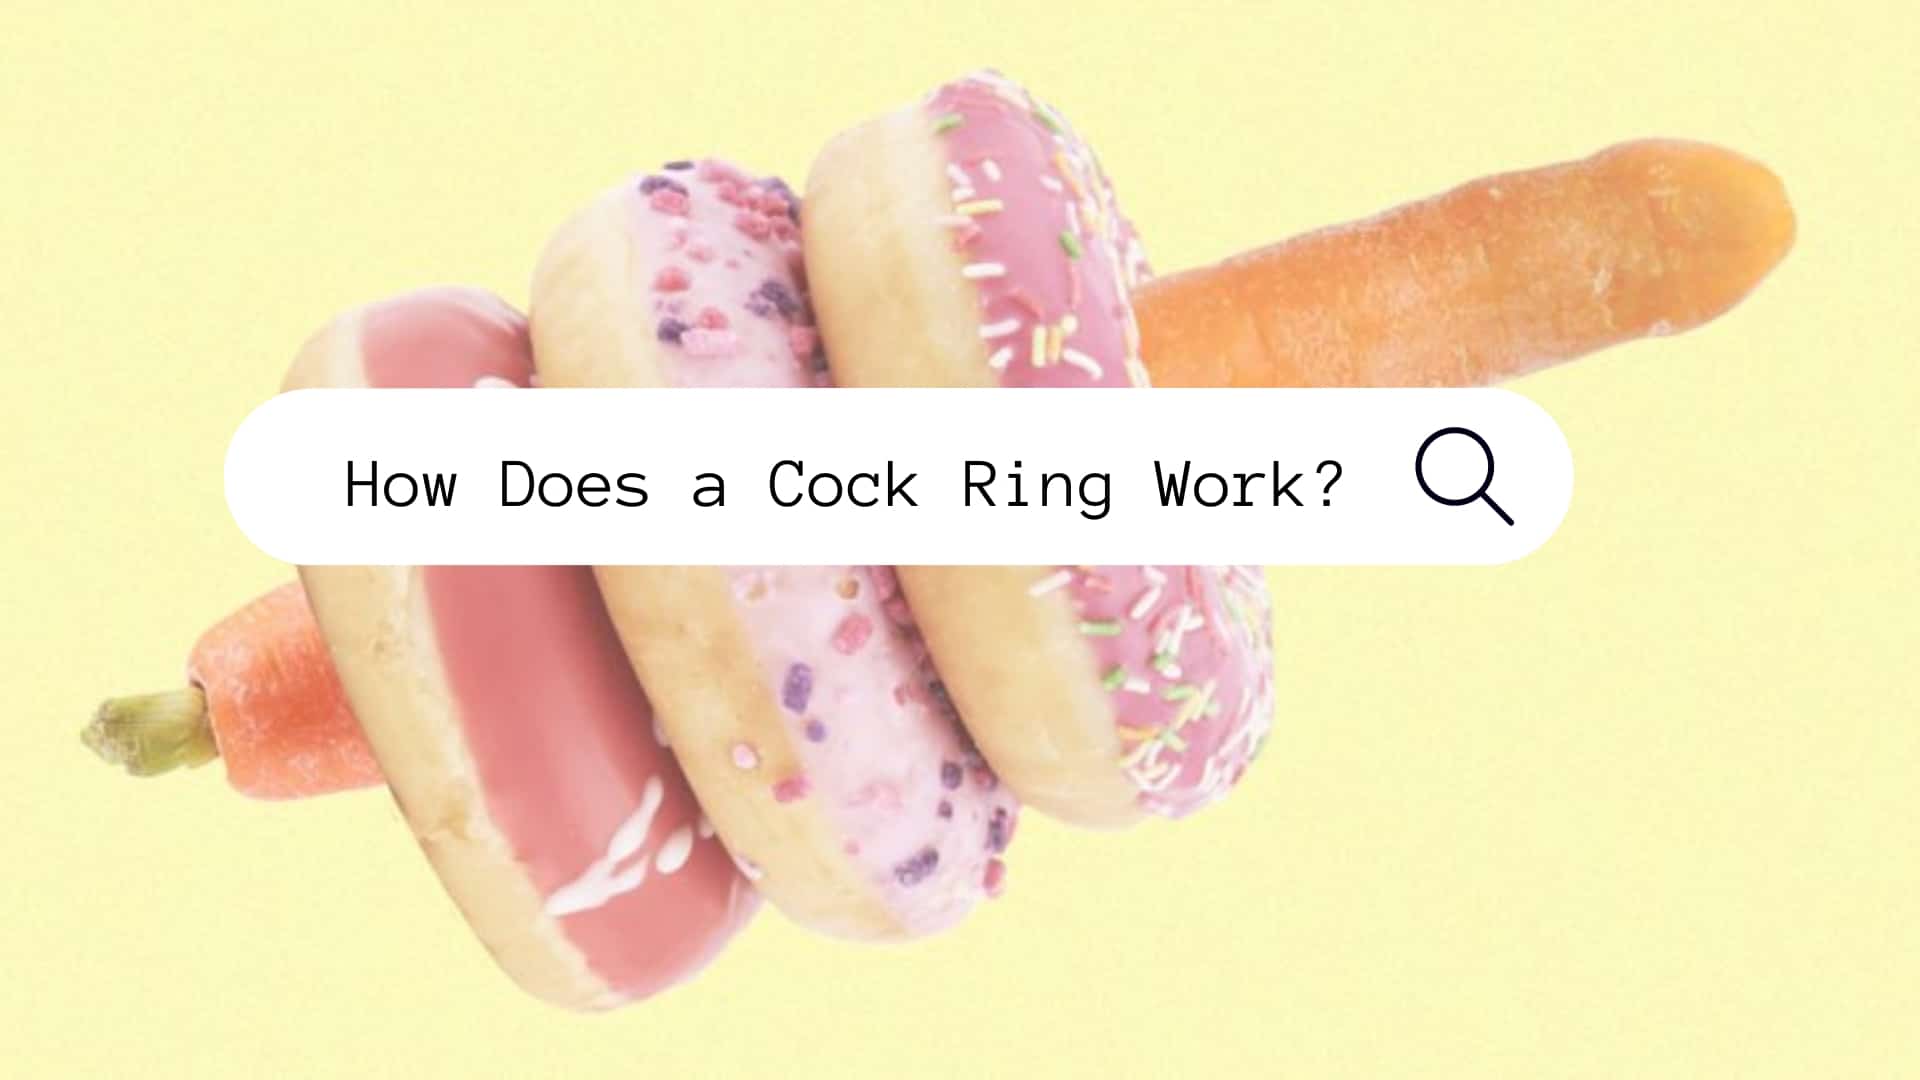 How Does a Cock Ring Work?